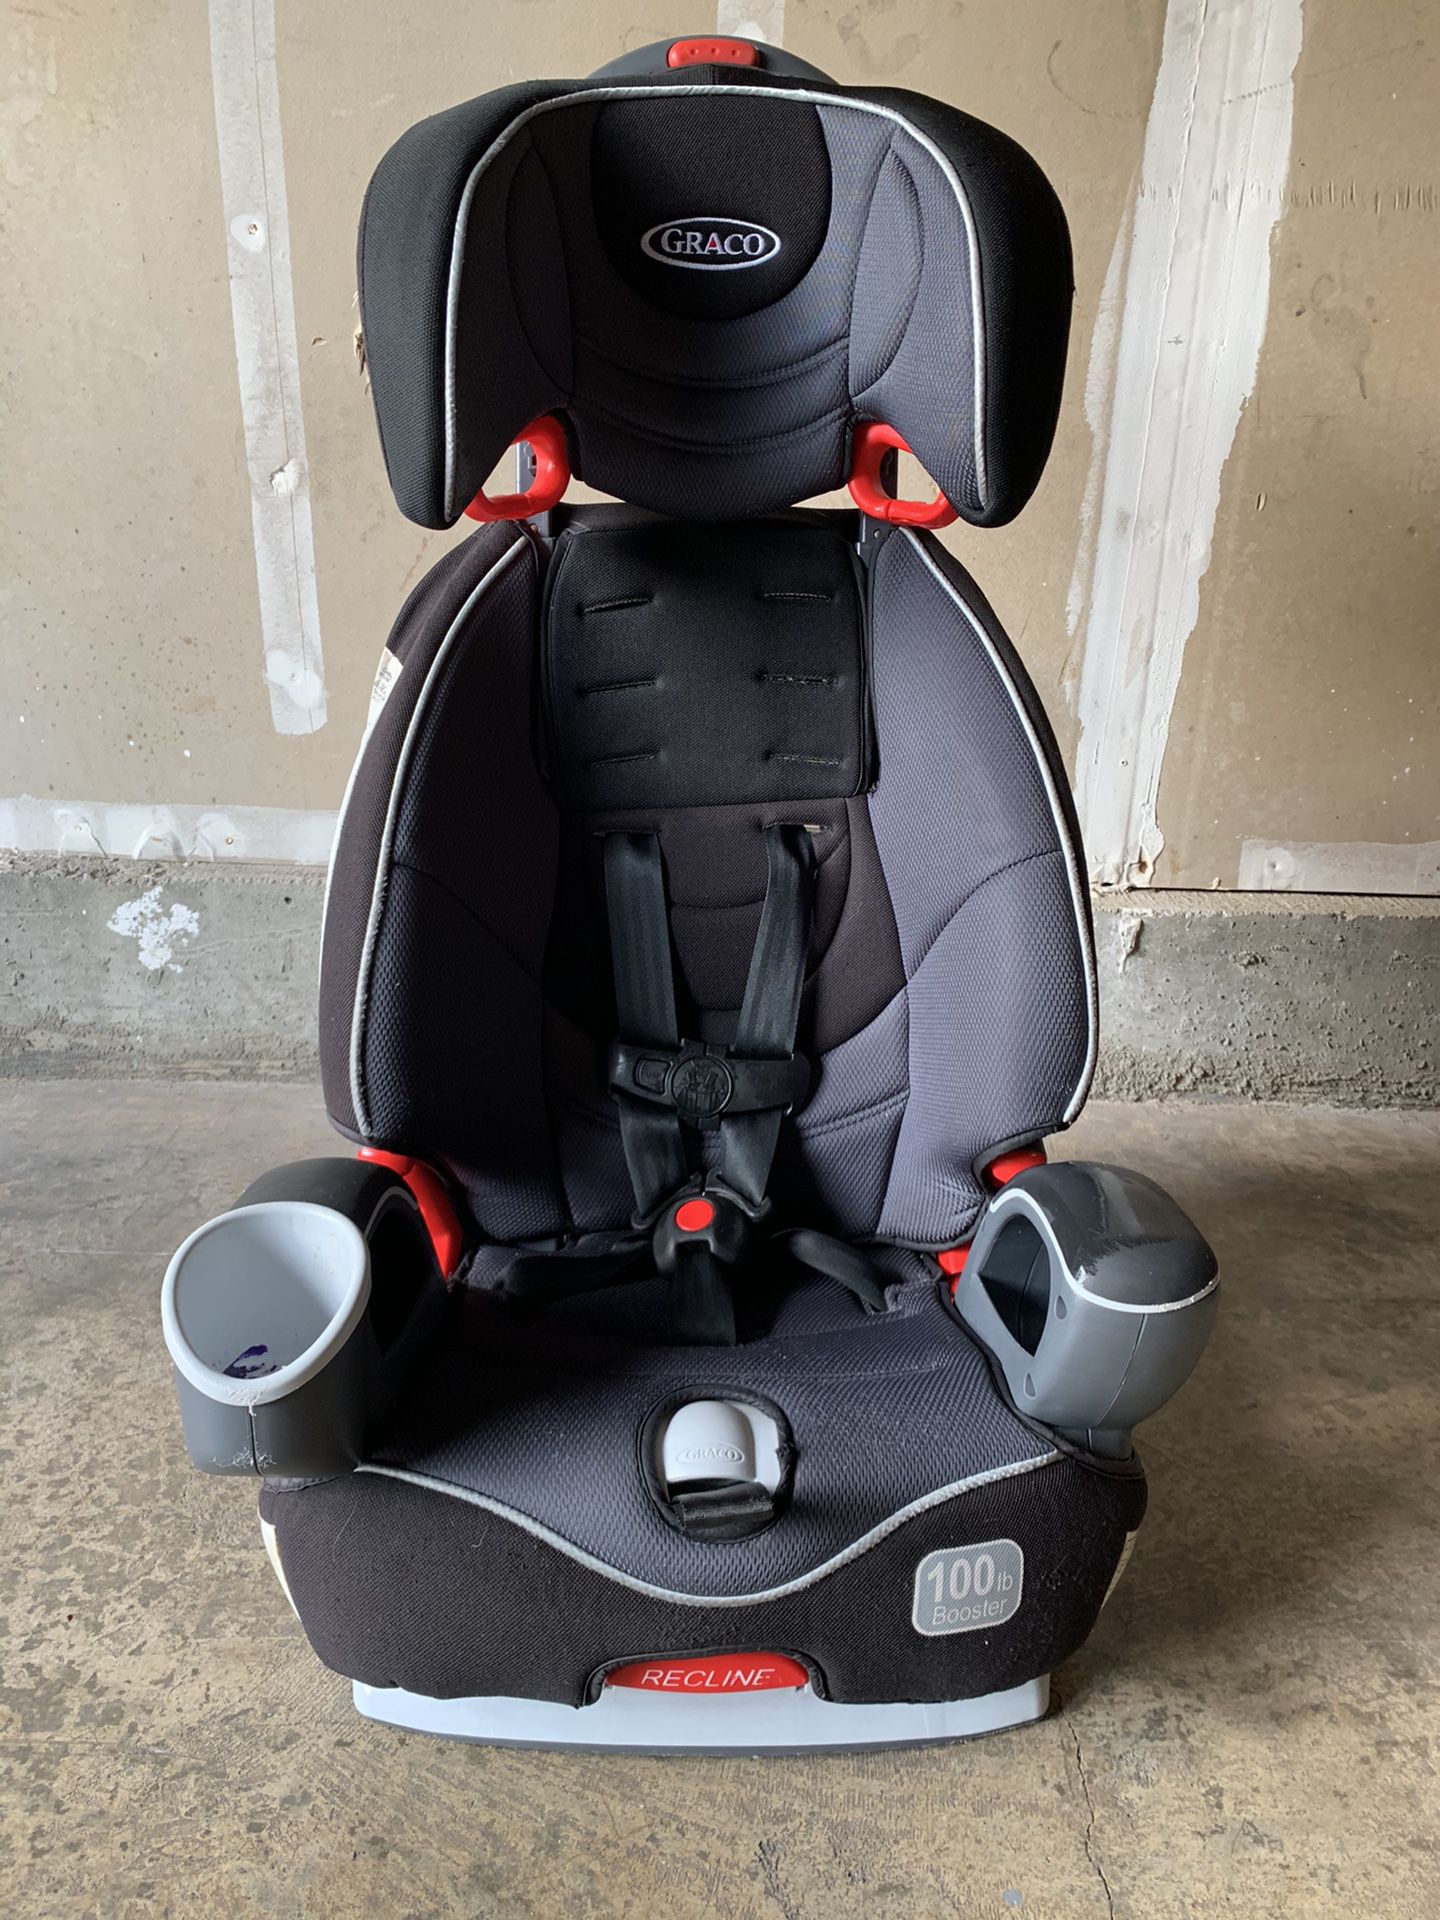 Graco 4-Ever All-In-One Convertible Car Seat great condition serious buyer only, please 🙏